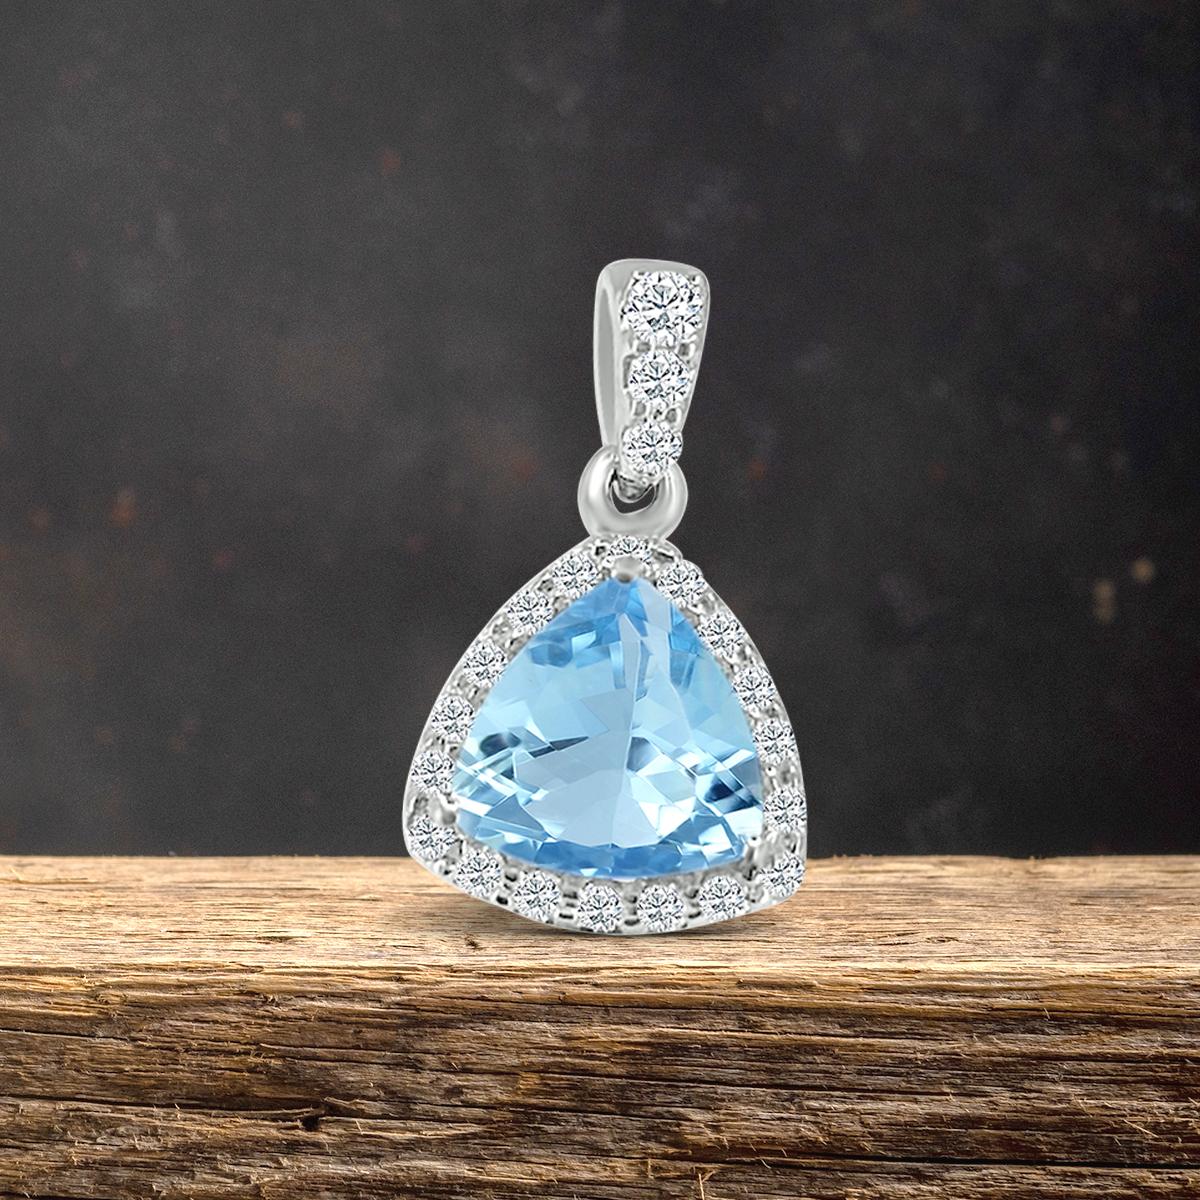 Modern 14k White Gold 0.91cts Aquamarine and Diamond Pendant, Style#TS1078AQP 21056/4 For Sale